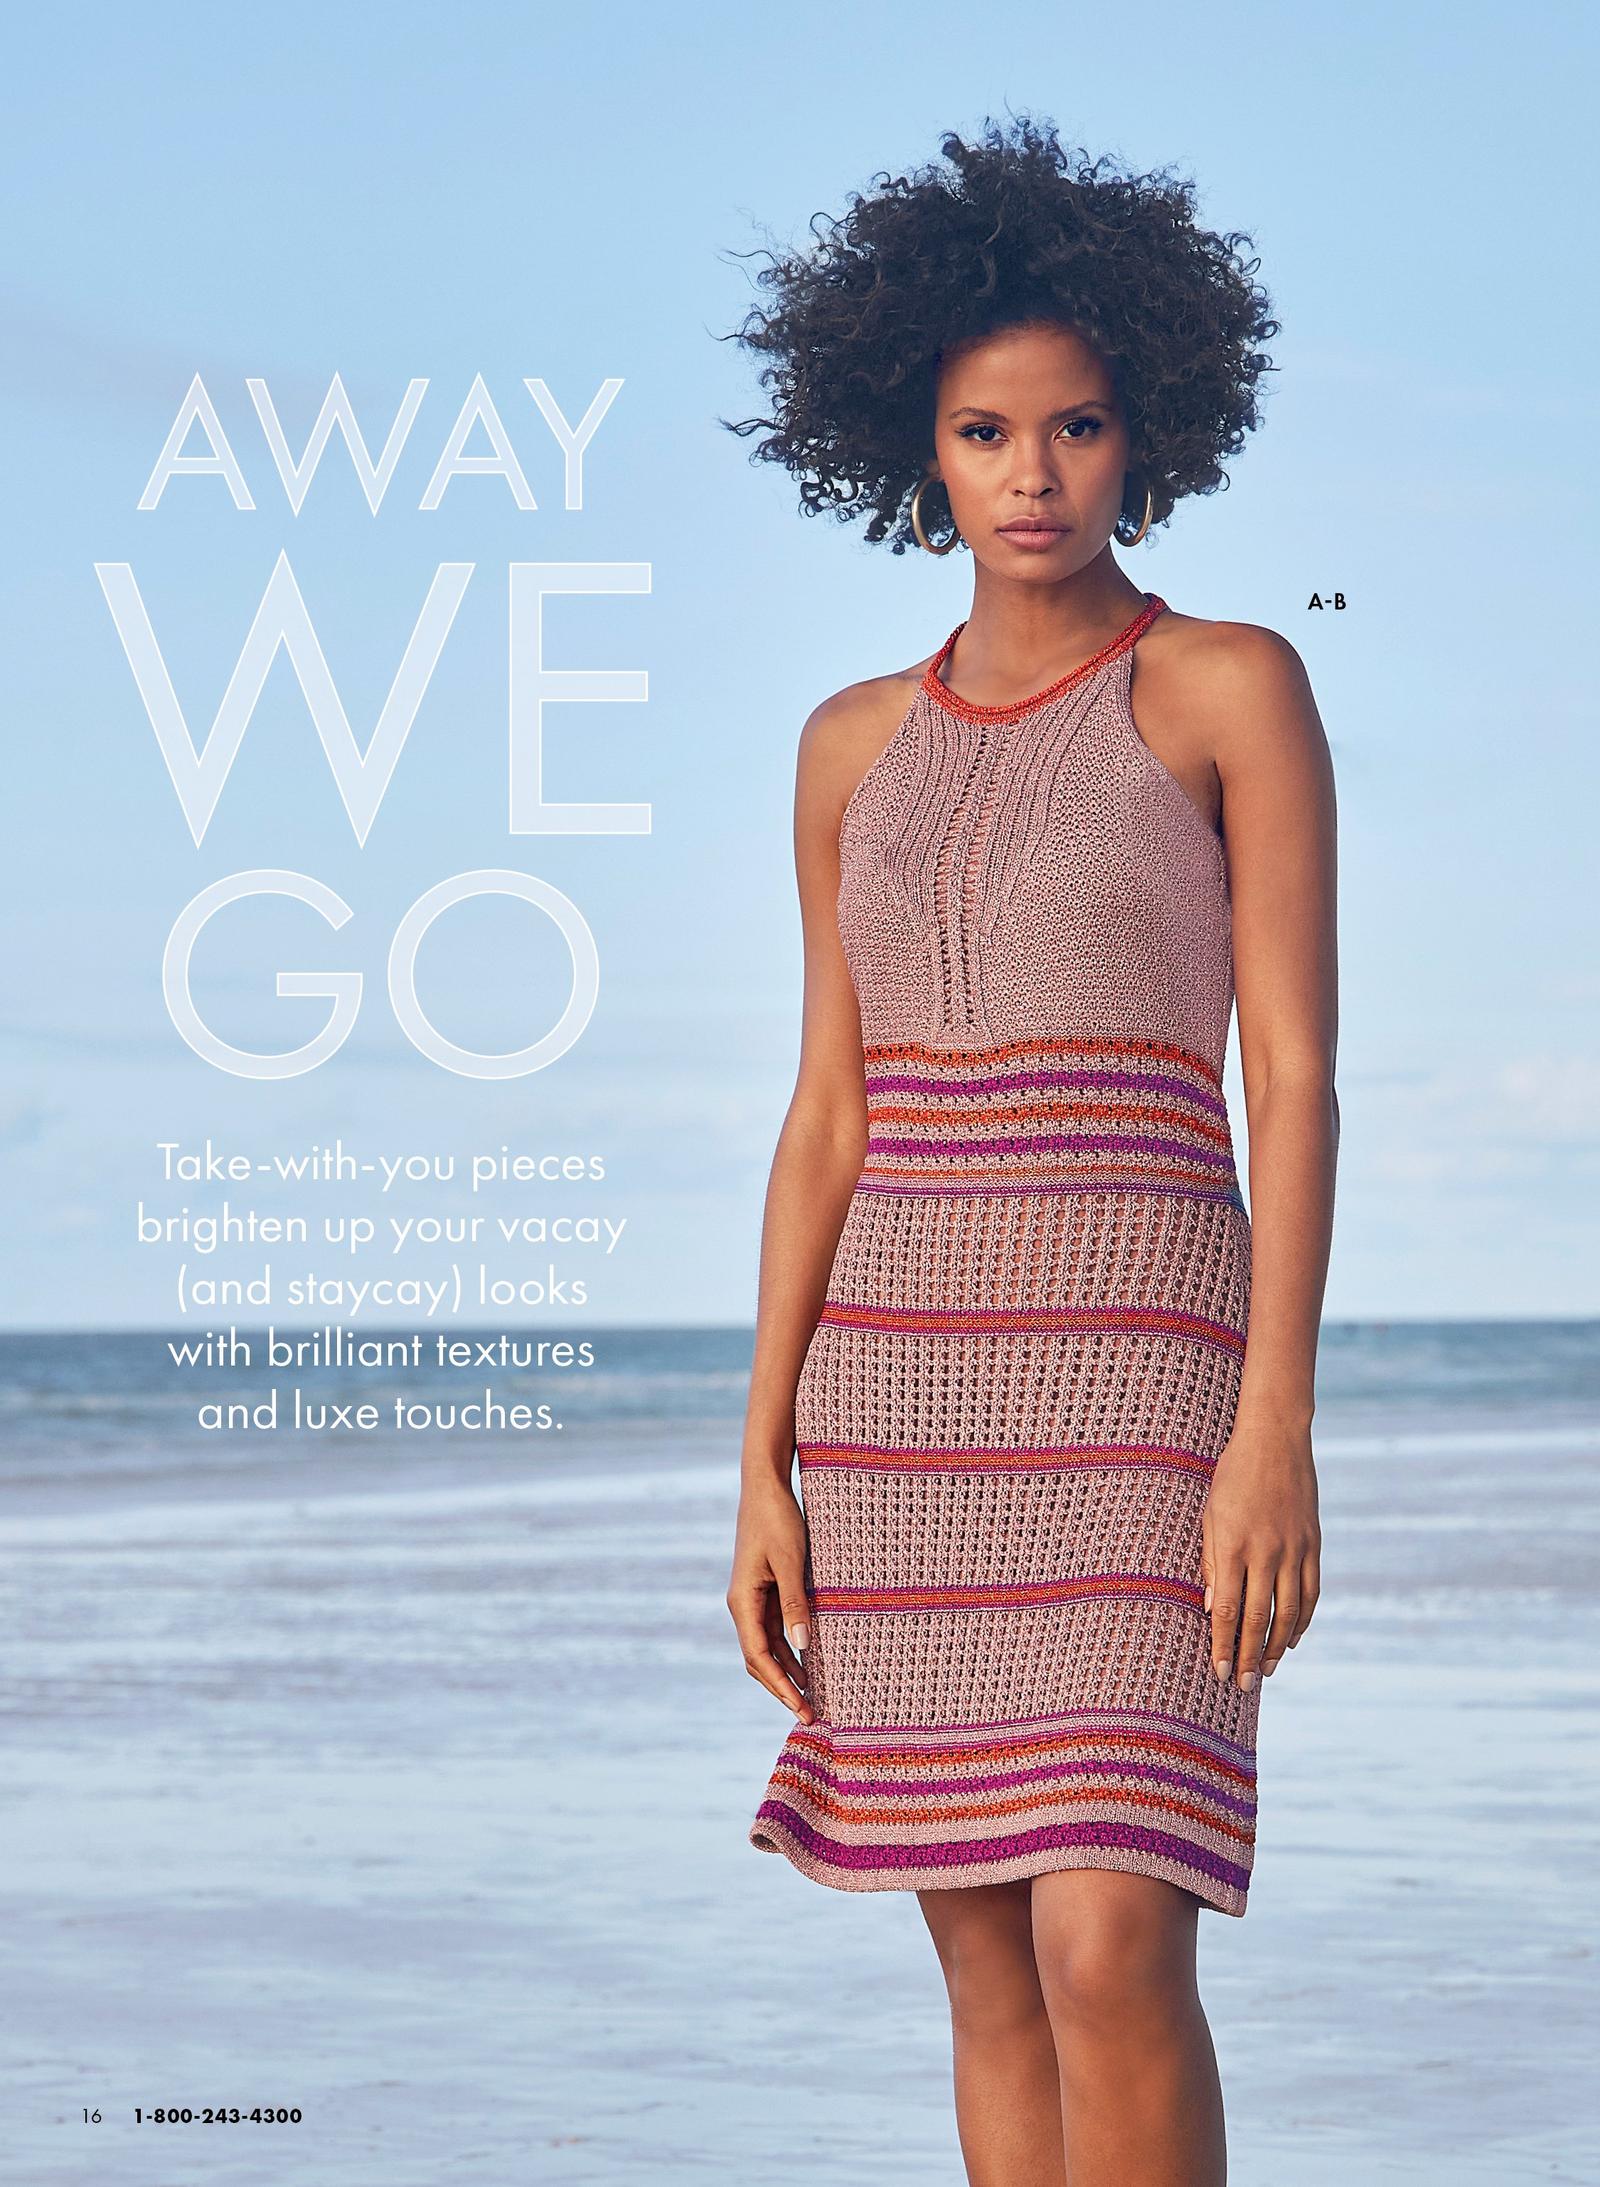 Model is wearing the Metallic Crochet Striped Dress in mauve, magenta and orange and the Thick Statement Hoop Earrings in Brass.